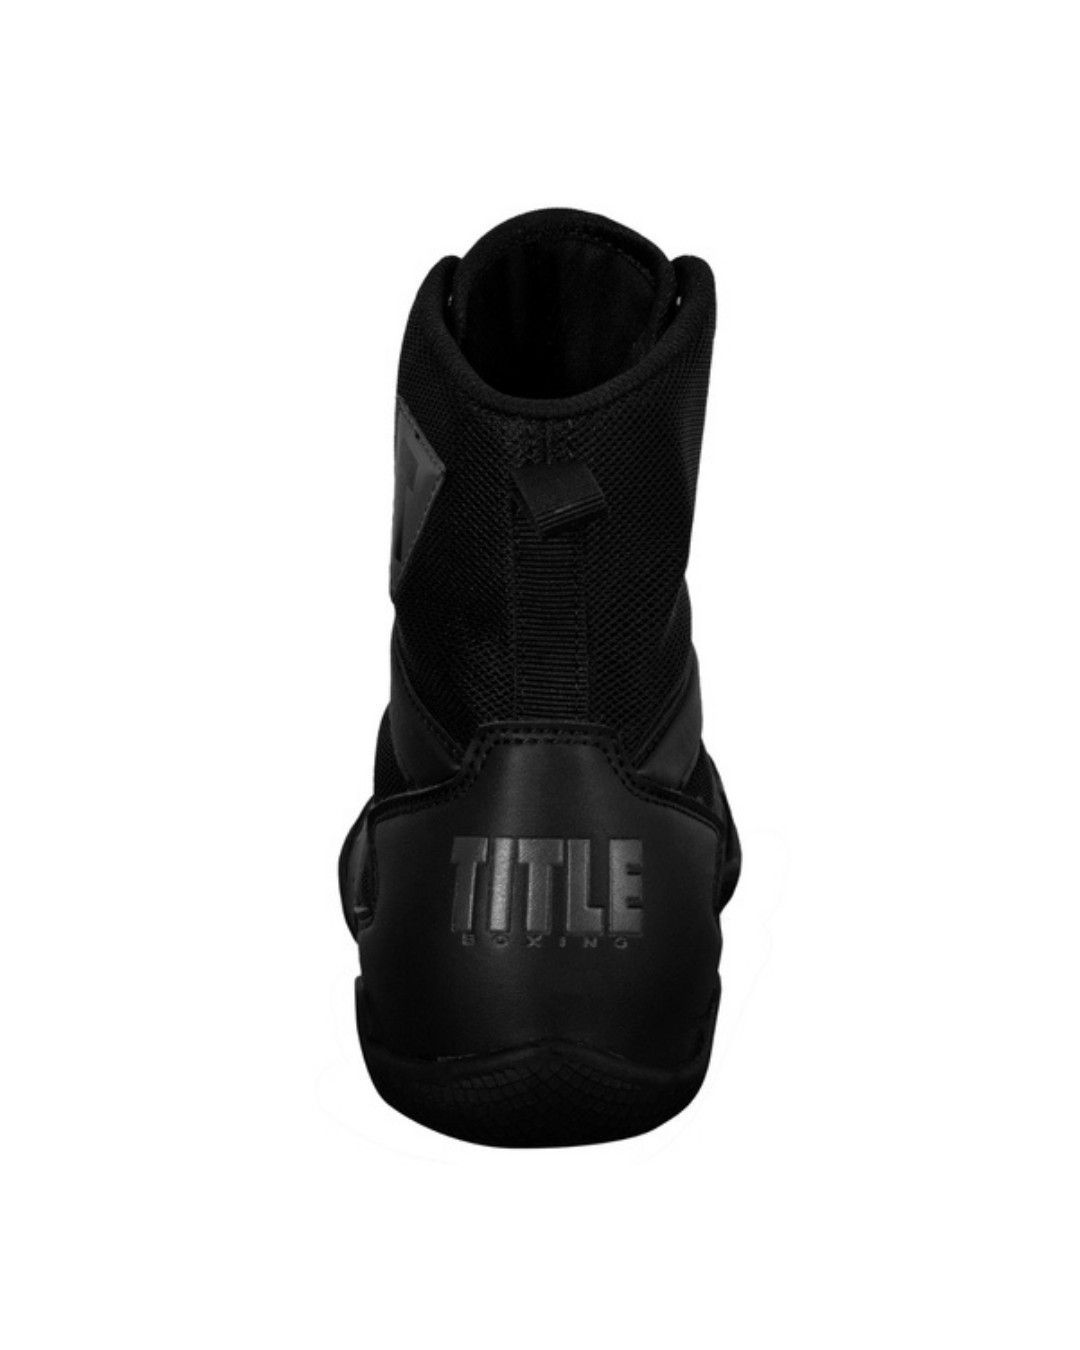 ZAPATILLAS  DE BOXEO TITLE CHARGED BOXING NEGRO